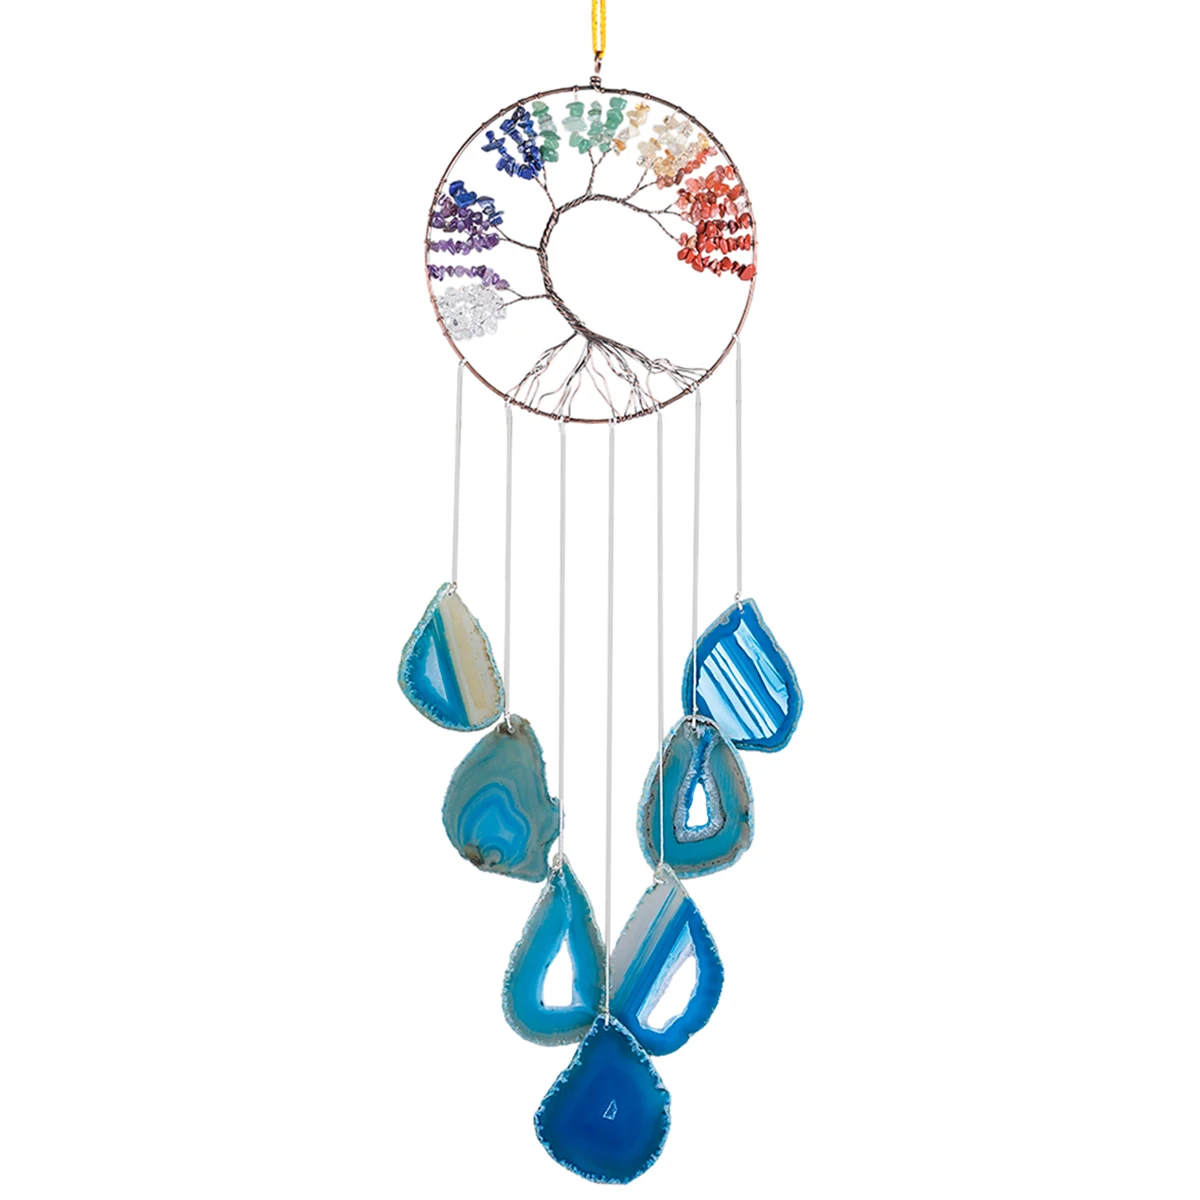 Natural Crystal Stone Wind Chime Tree Of Life 7 Chakra Healing Slices Agate Handmade Wall Hanging Ornaments Home Decoration Gift natural crystal stone star moon shape hanging ornament reiki healing gemstone wall decor for window home decoration